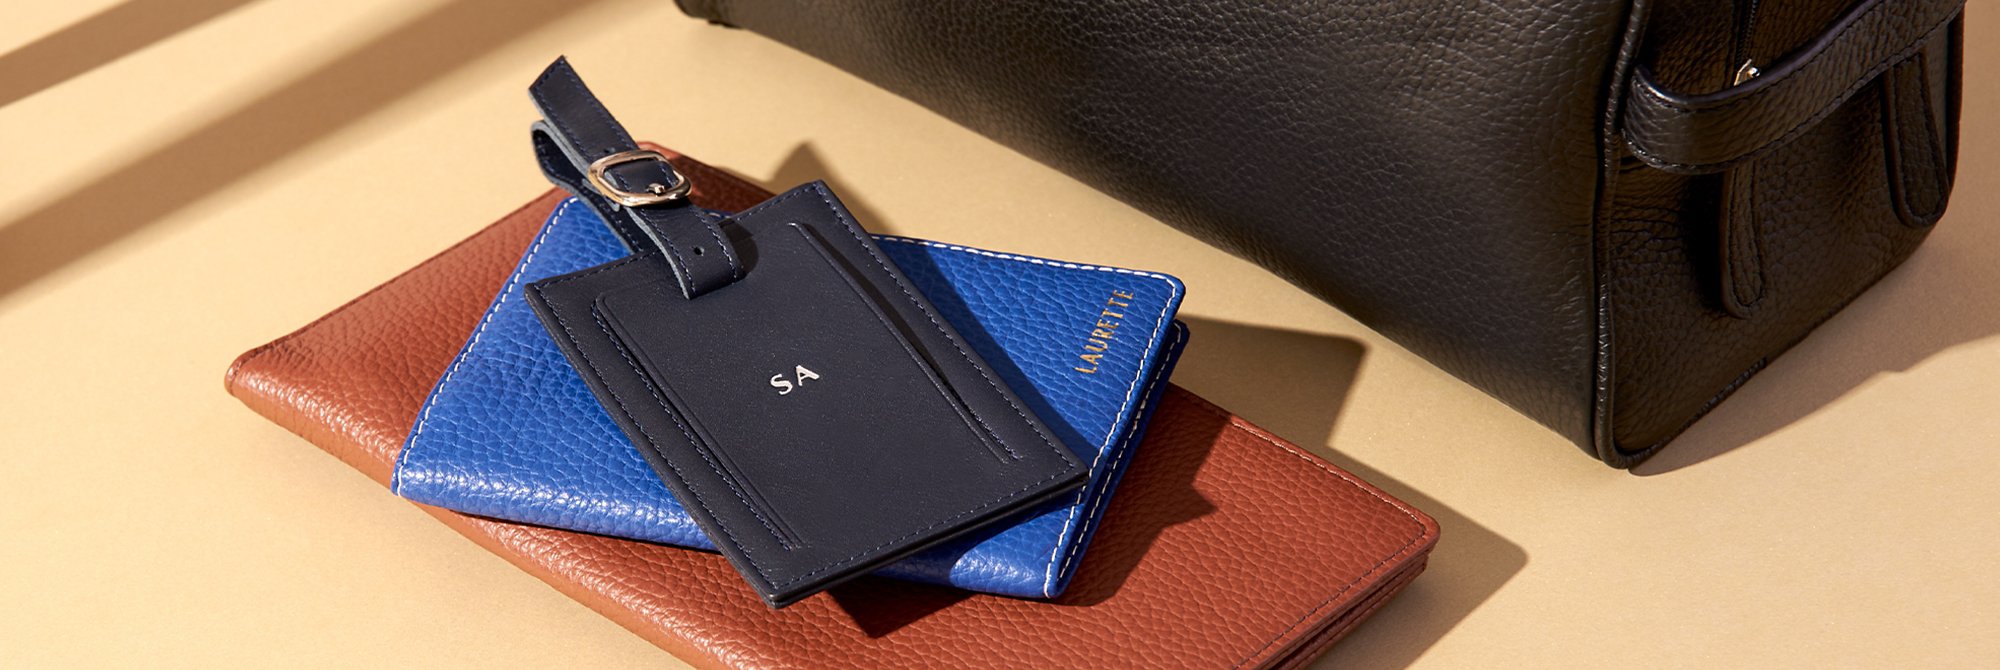 Small Leather Goods designed by LUCRIN Geneva